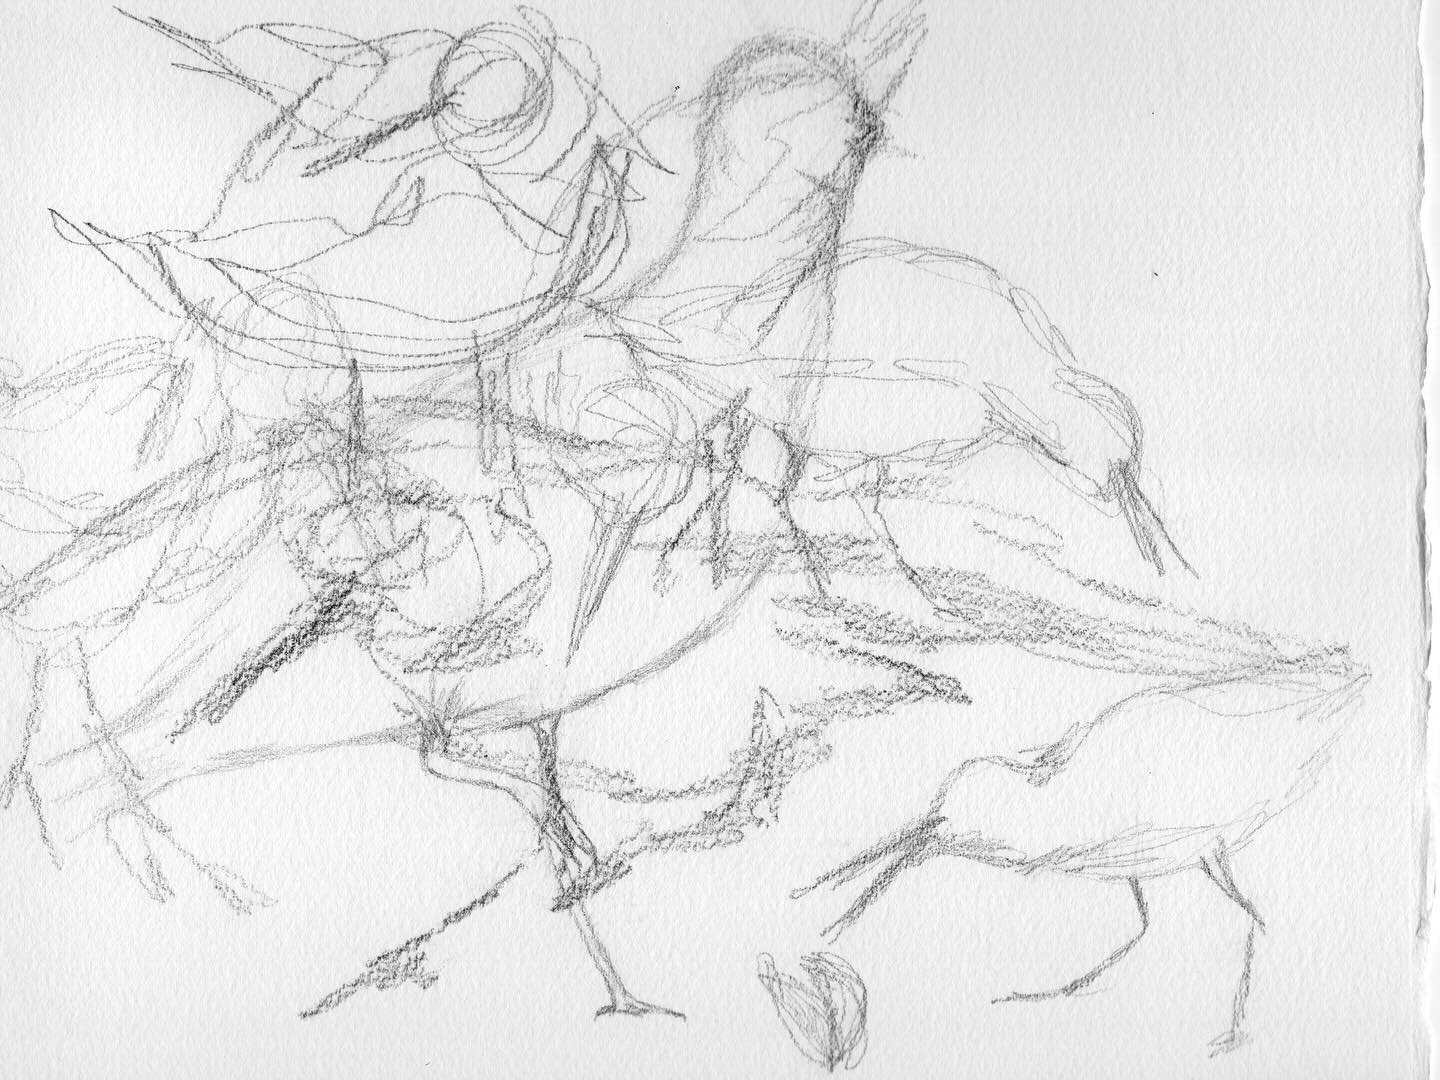 The chaos of striking a pose and building muscle memory for the Oystercatcher